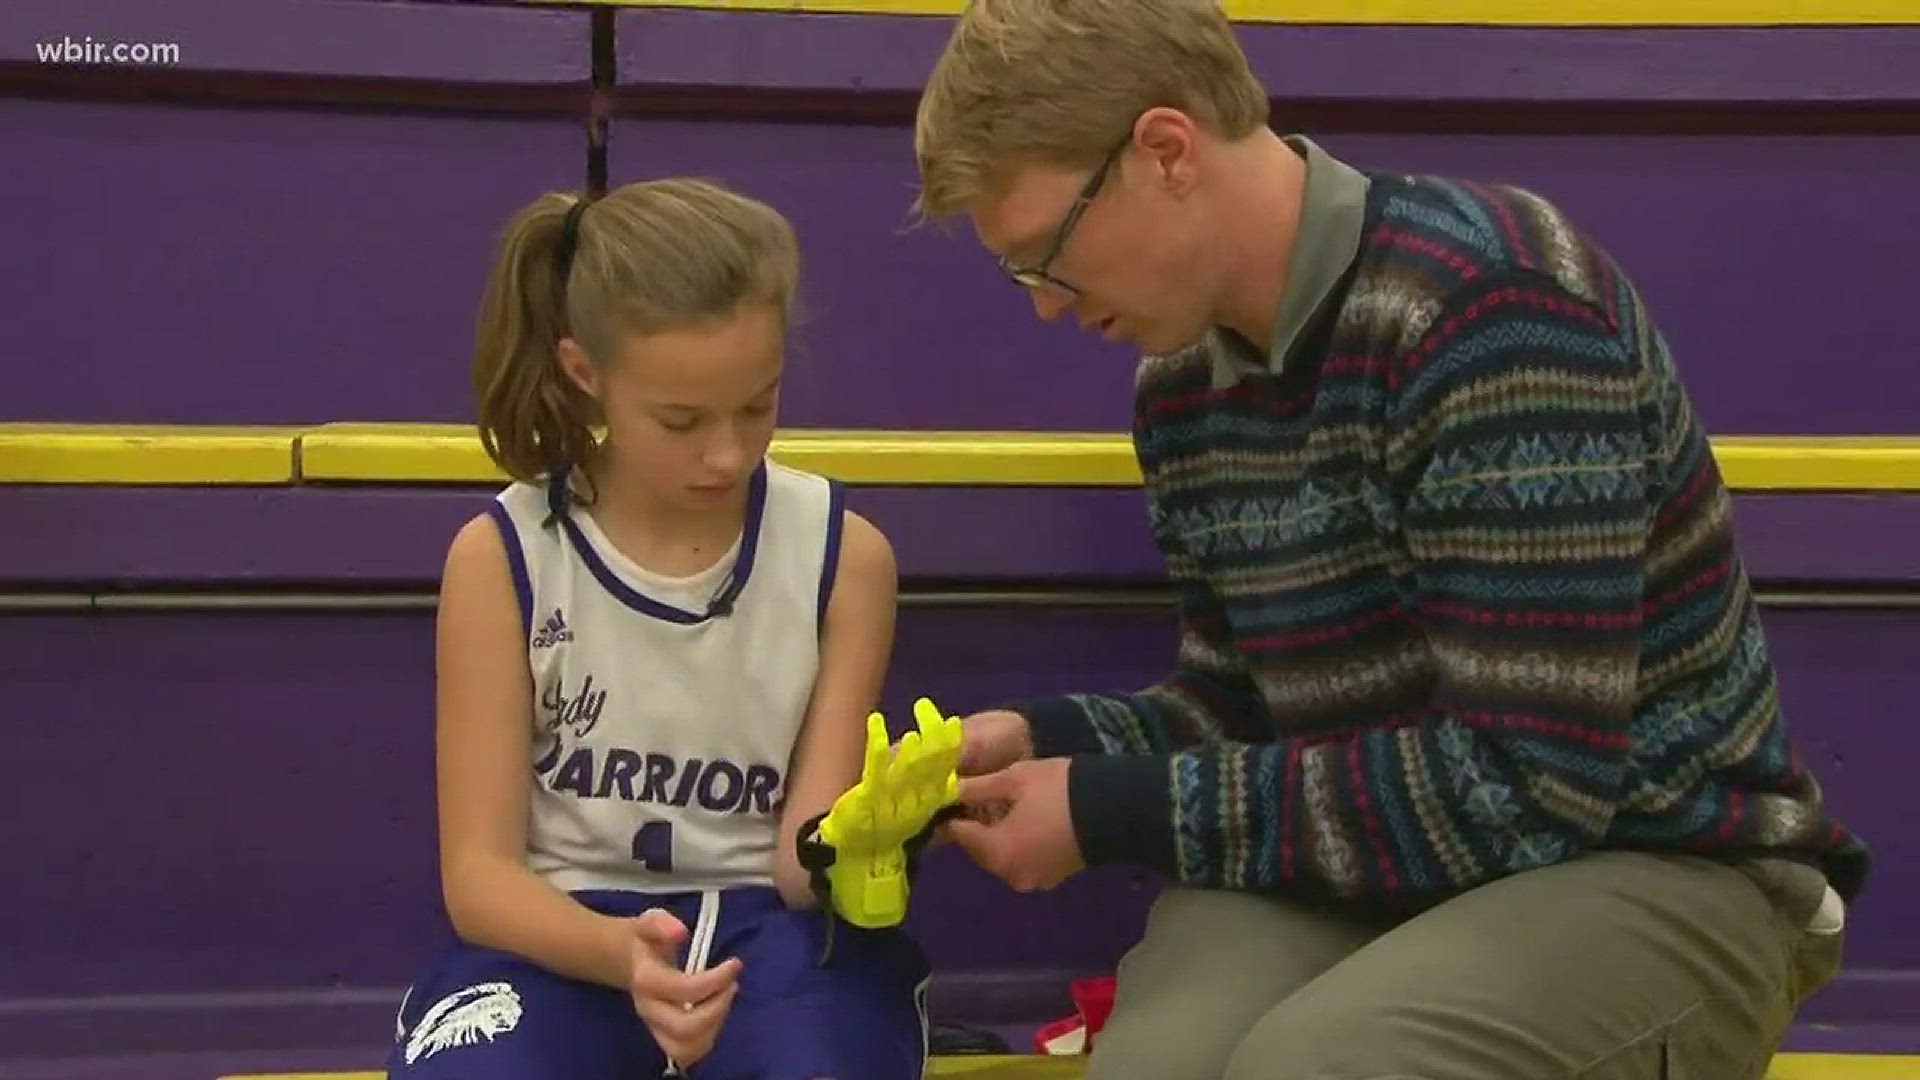 Dec. 11, 2017: Two Loudon County students received the gift of a 3-D printed prosthetic hand.